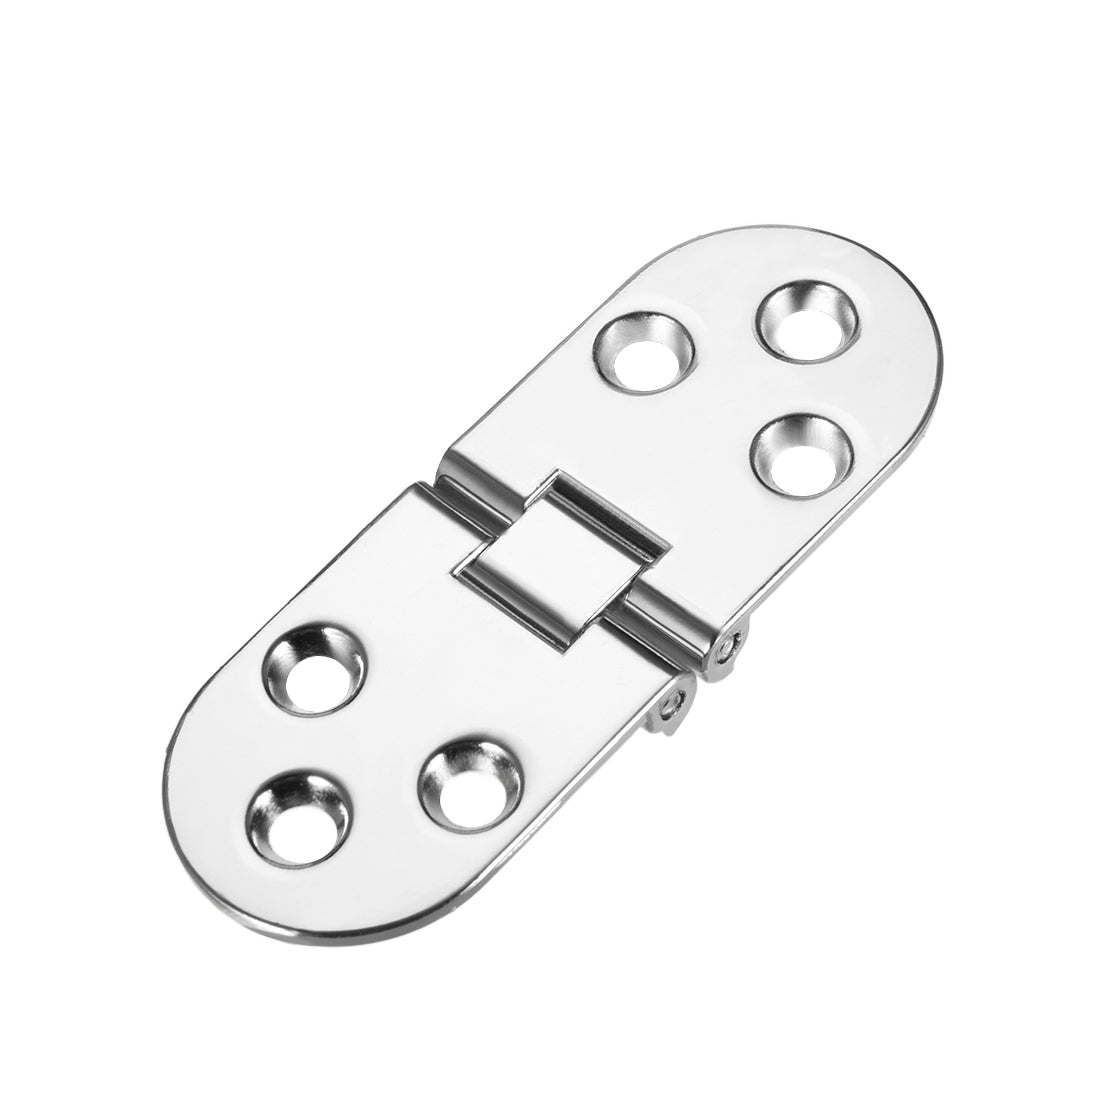 uxcell Uxcell 2 Pcs Sewing Aircraft Table Folding Flip Hinge, Zinc alloy Chrome Plating Finish